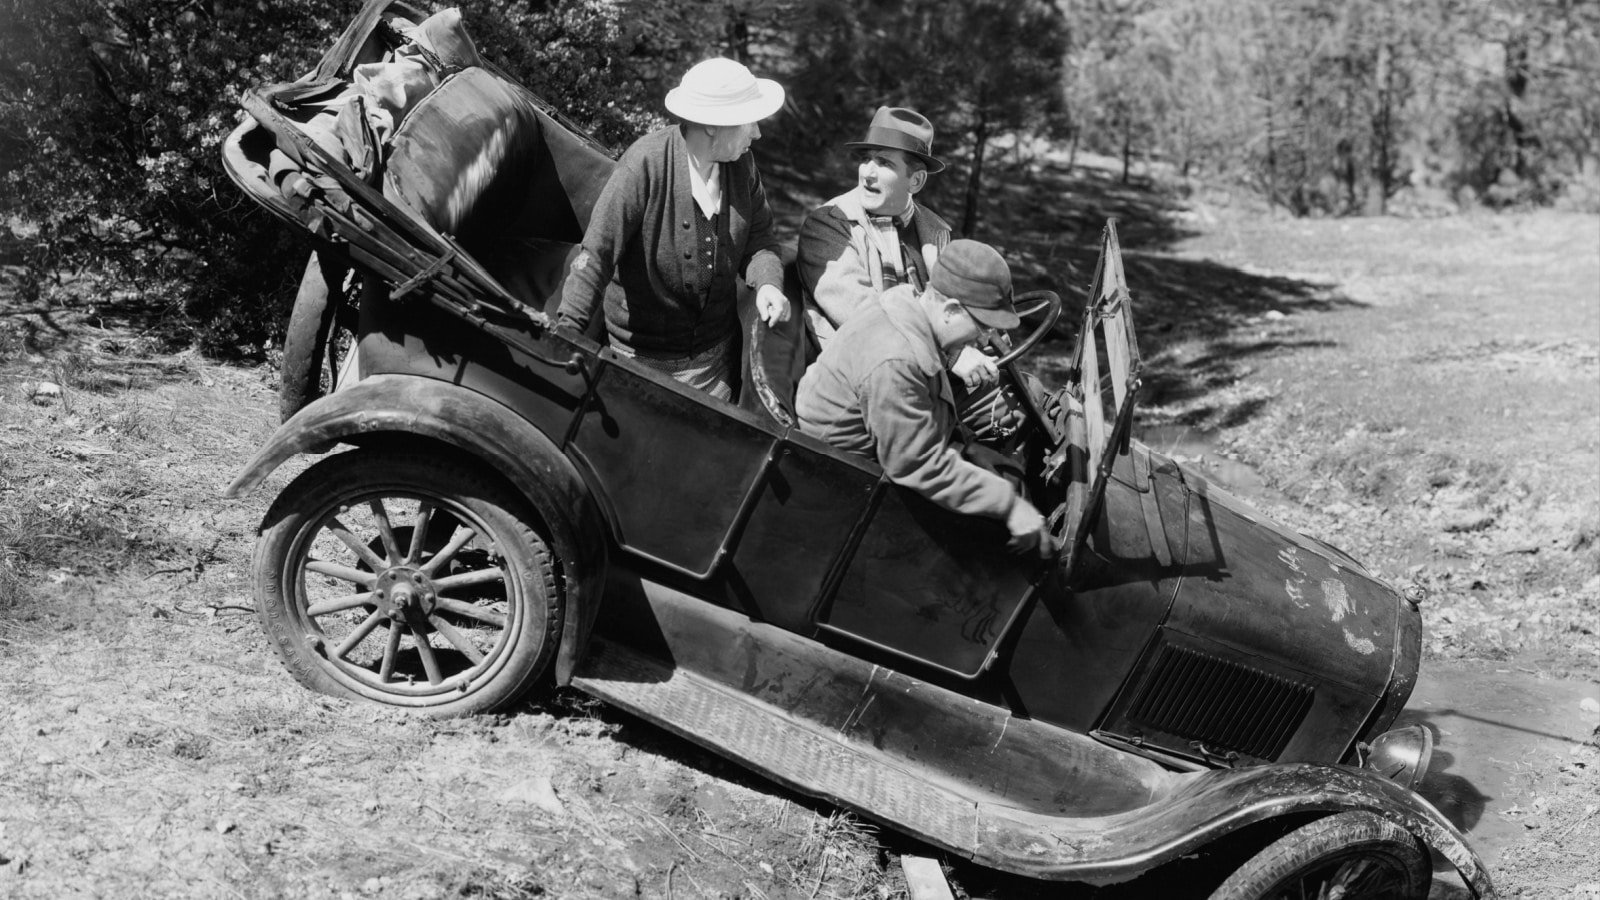 <p>The term “jalopy” is slang for an old, beat-up car. It first emerged in the United States during the 1920s. The most widely accepted theory suggests that the word comes from Jalapa, a place in Mexico where many used cars from the U.S. were reportedly sent in the early 1900s. However, the exact origins of the term remain unclear.</p>